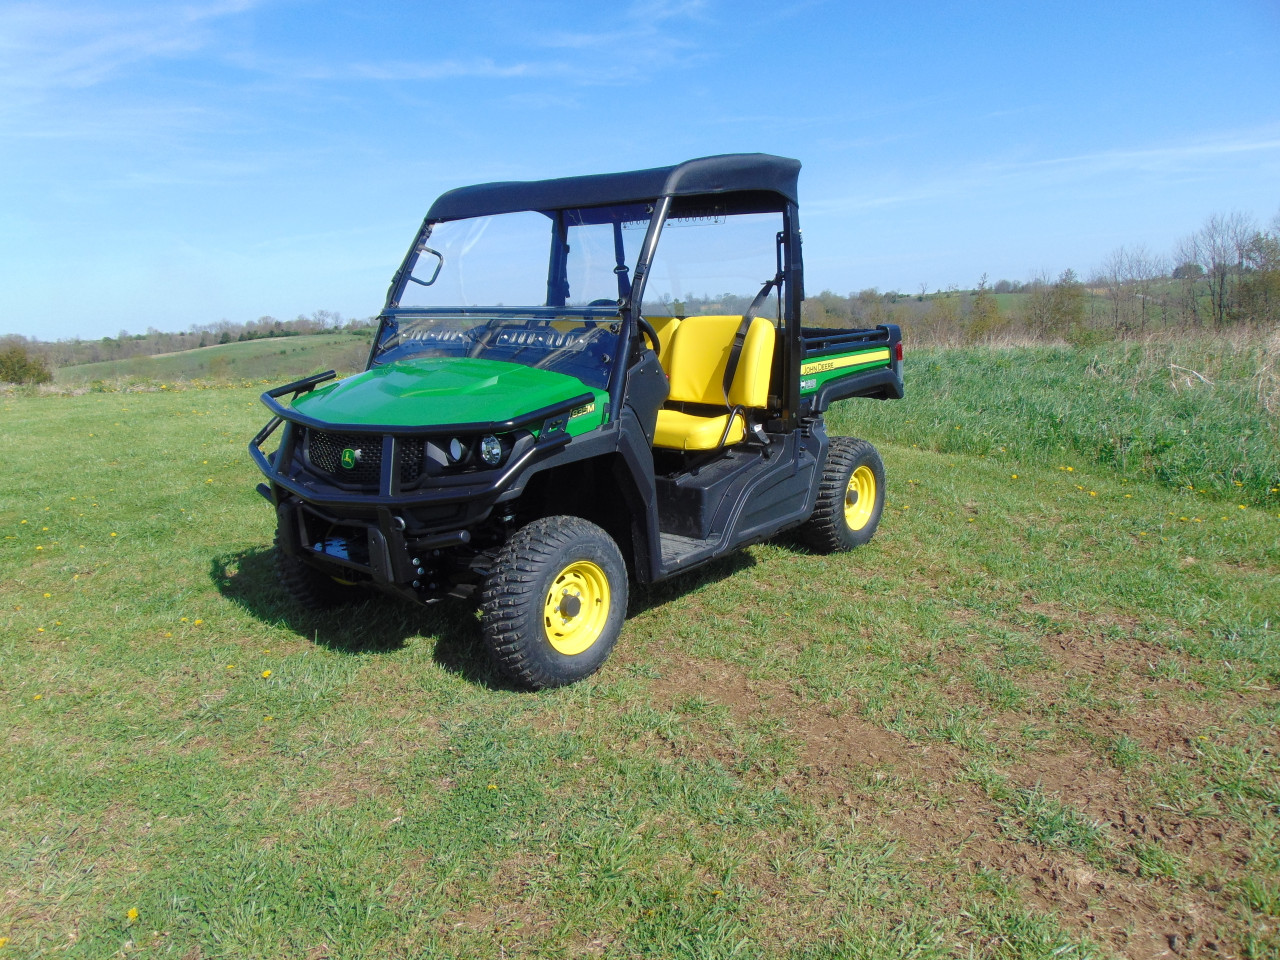 3 Star side x side John Deere Gator UXV 835/865 soft top front and side angle view